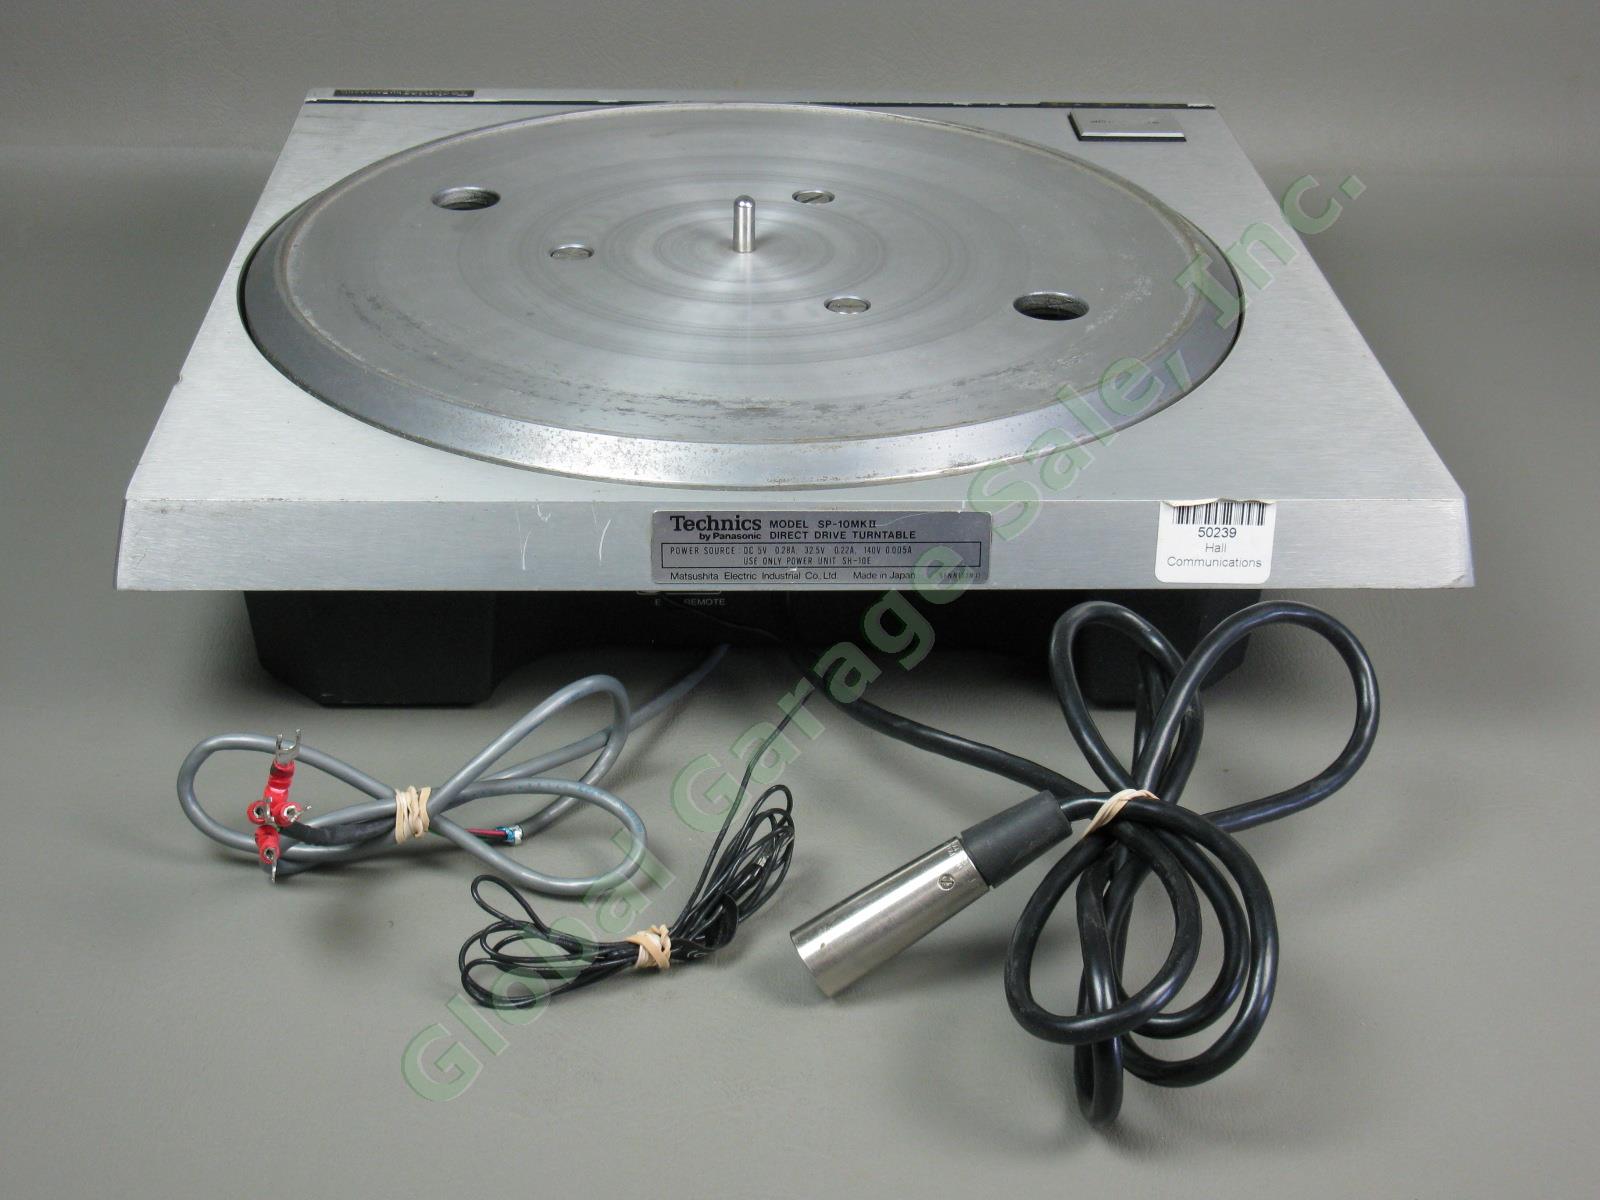 Vintage Panasonic Technics SP-10MKII Direct Drive Turntable For Parts Repair NR! 7